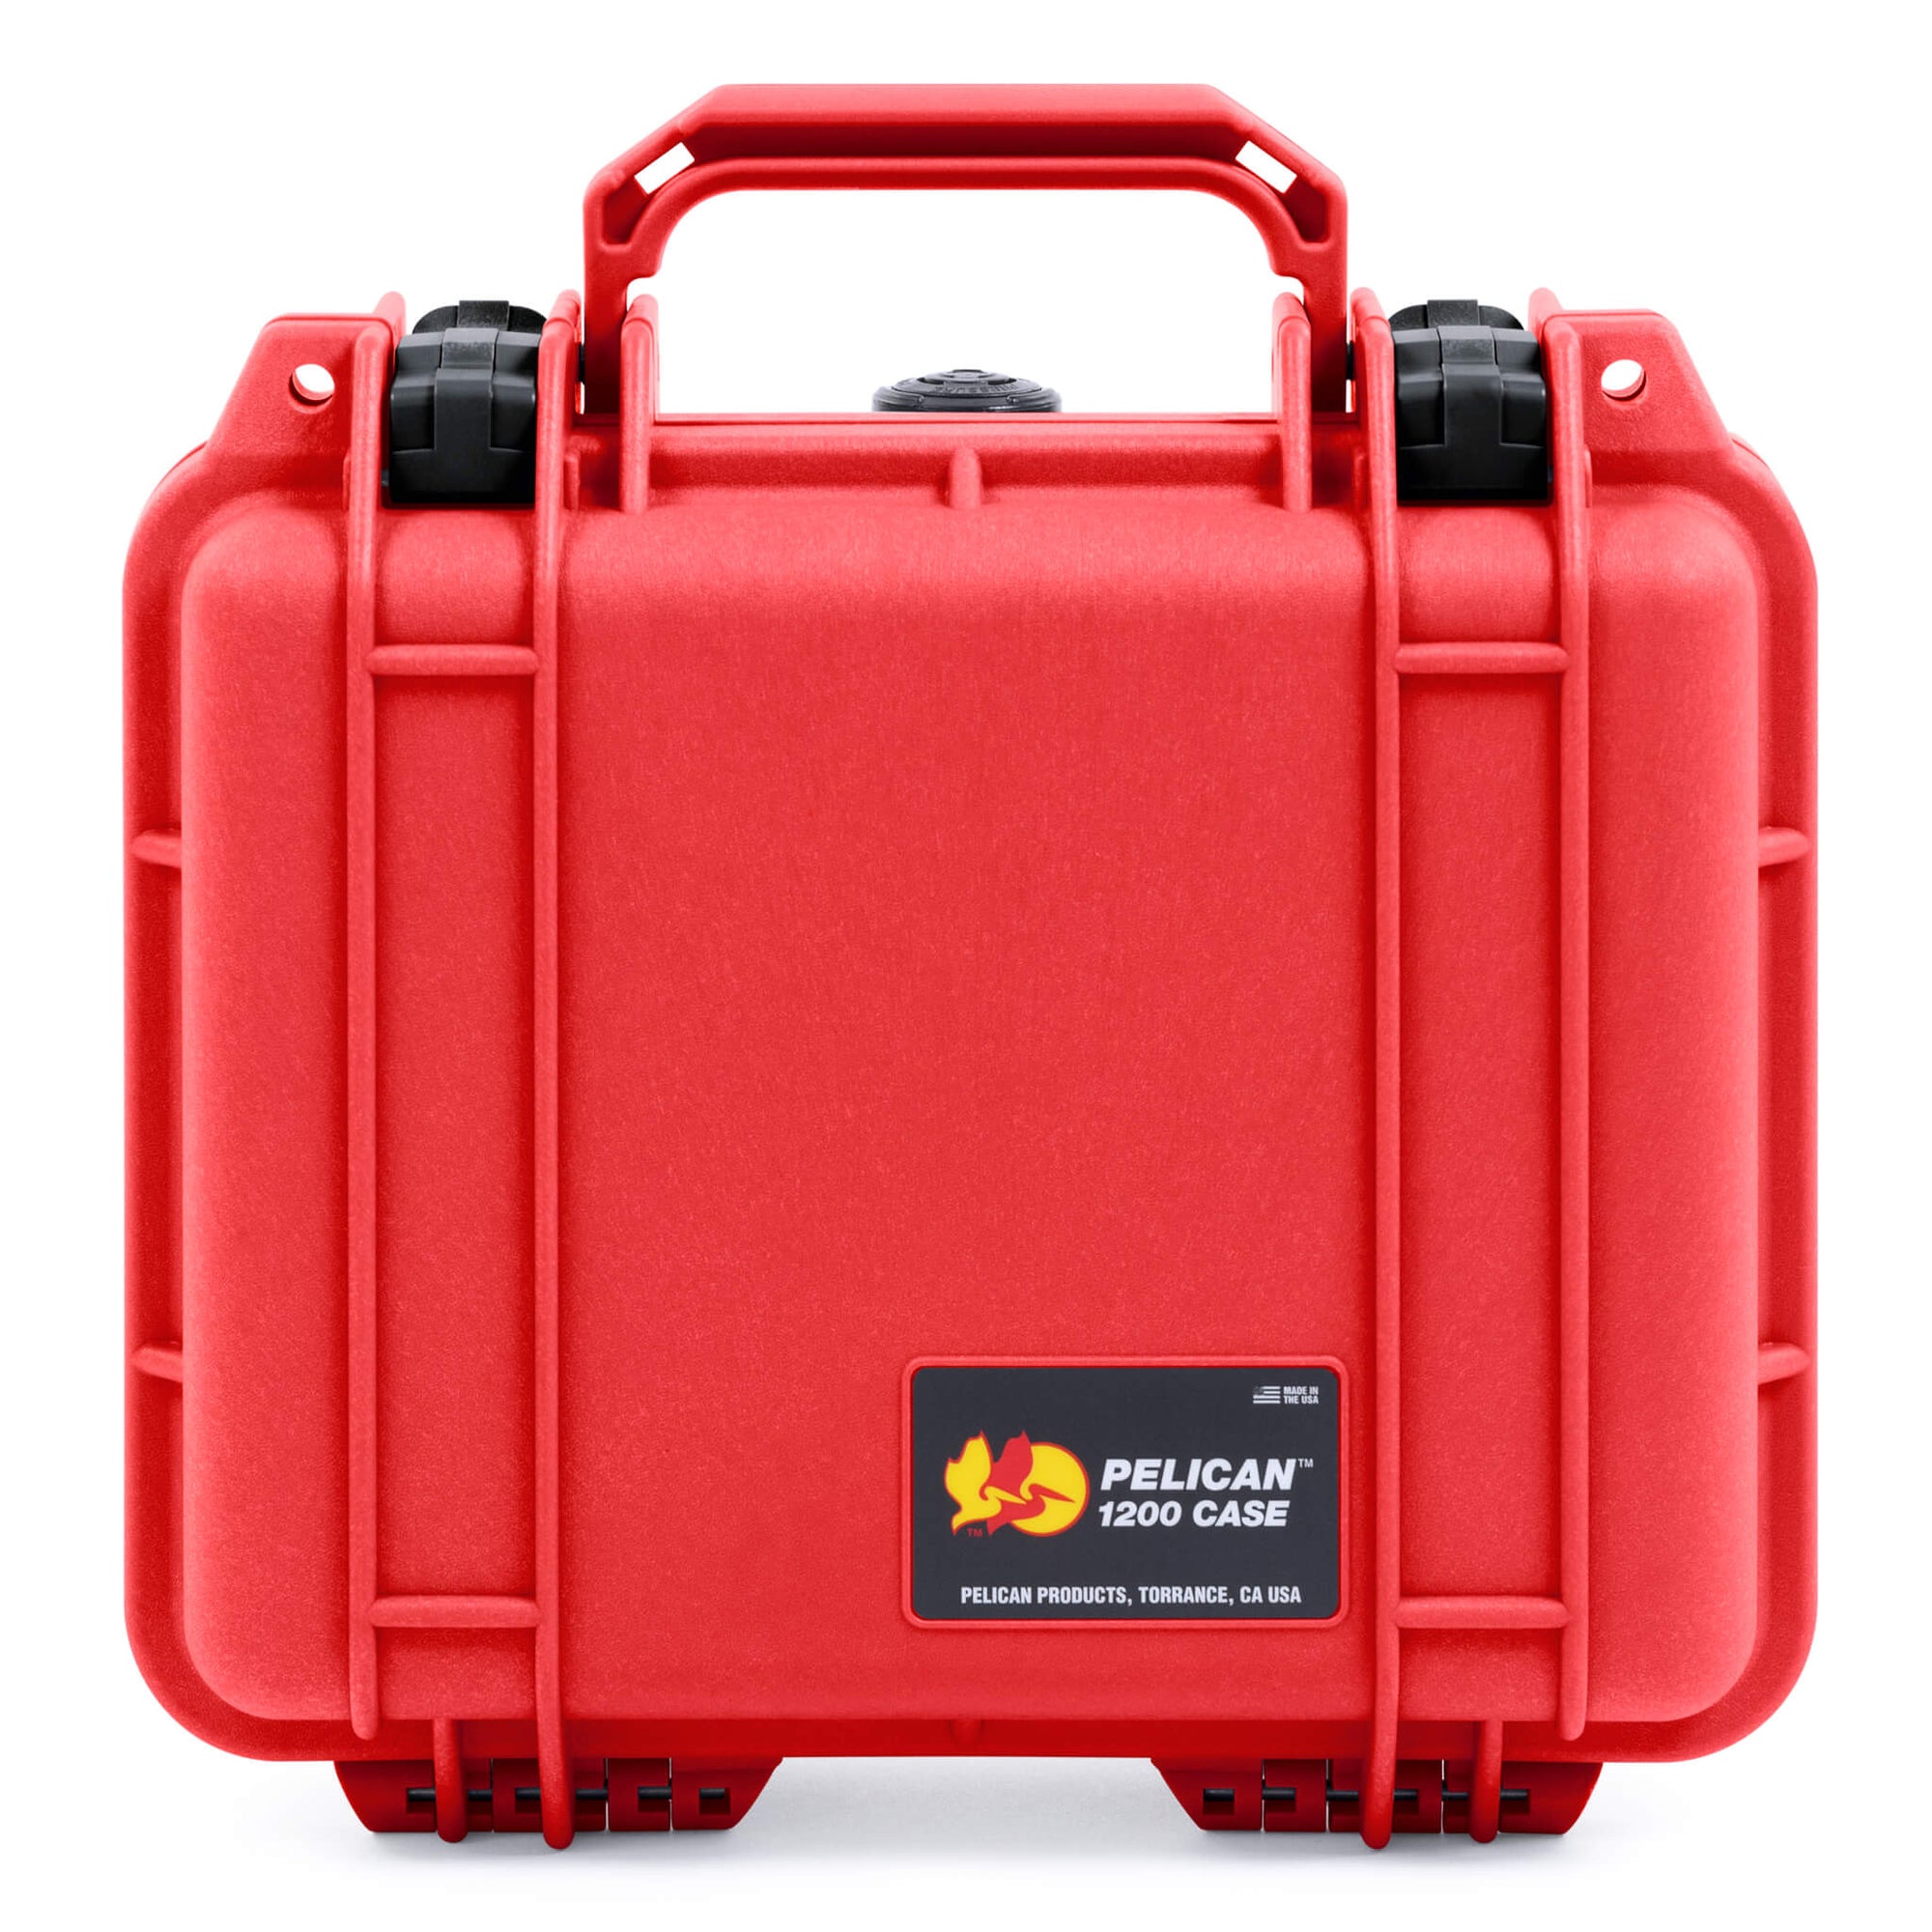 Pelican 1200 Case, Red with Black Latches ColorCase 